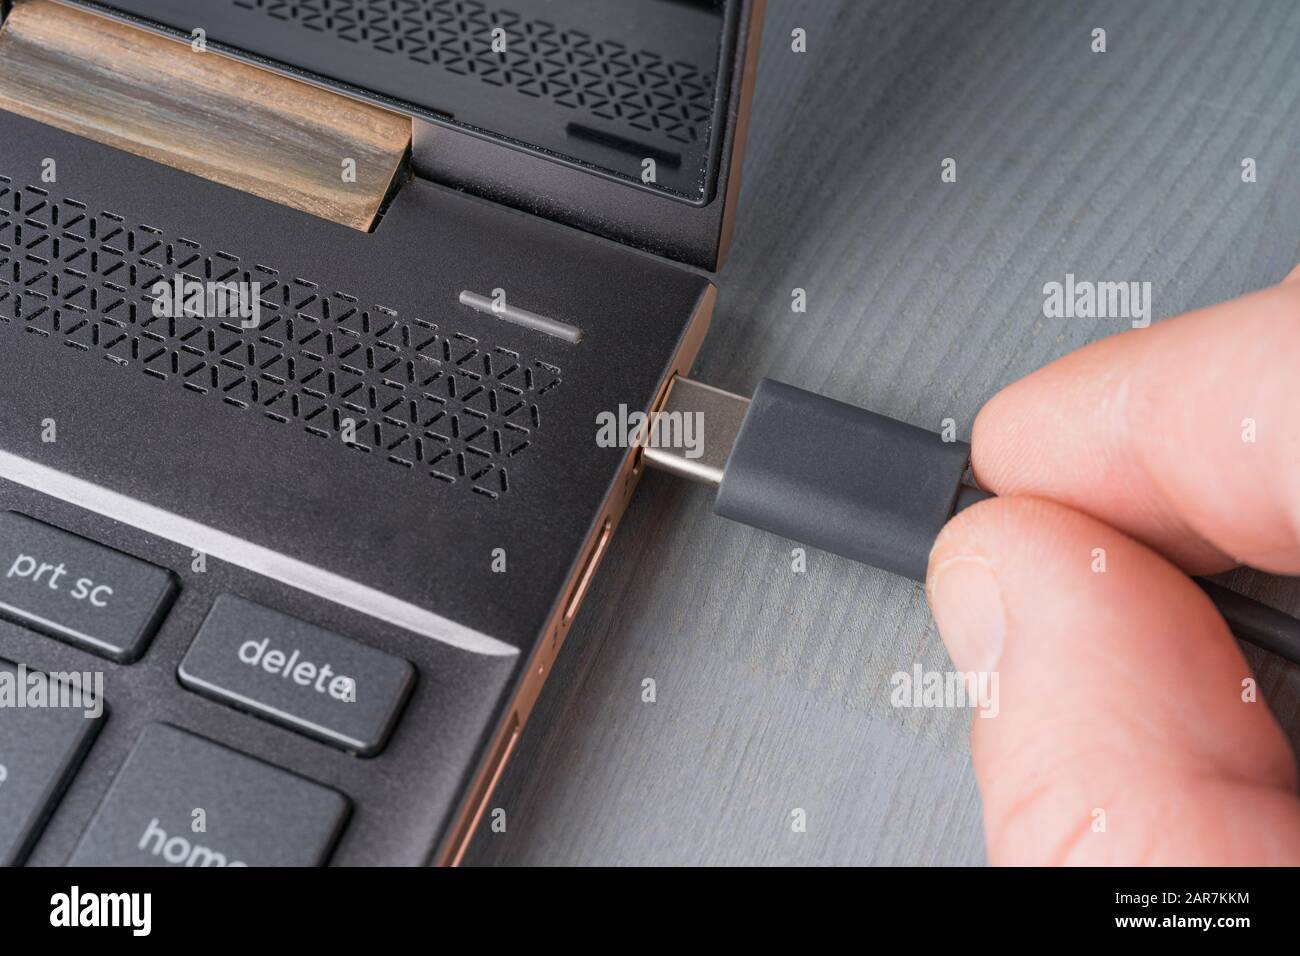 Closeup of USB Type C grey cable being connected to the laptop computer. Stock Photo